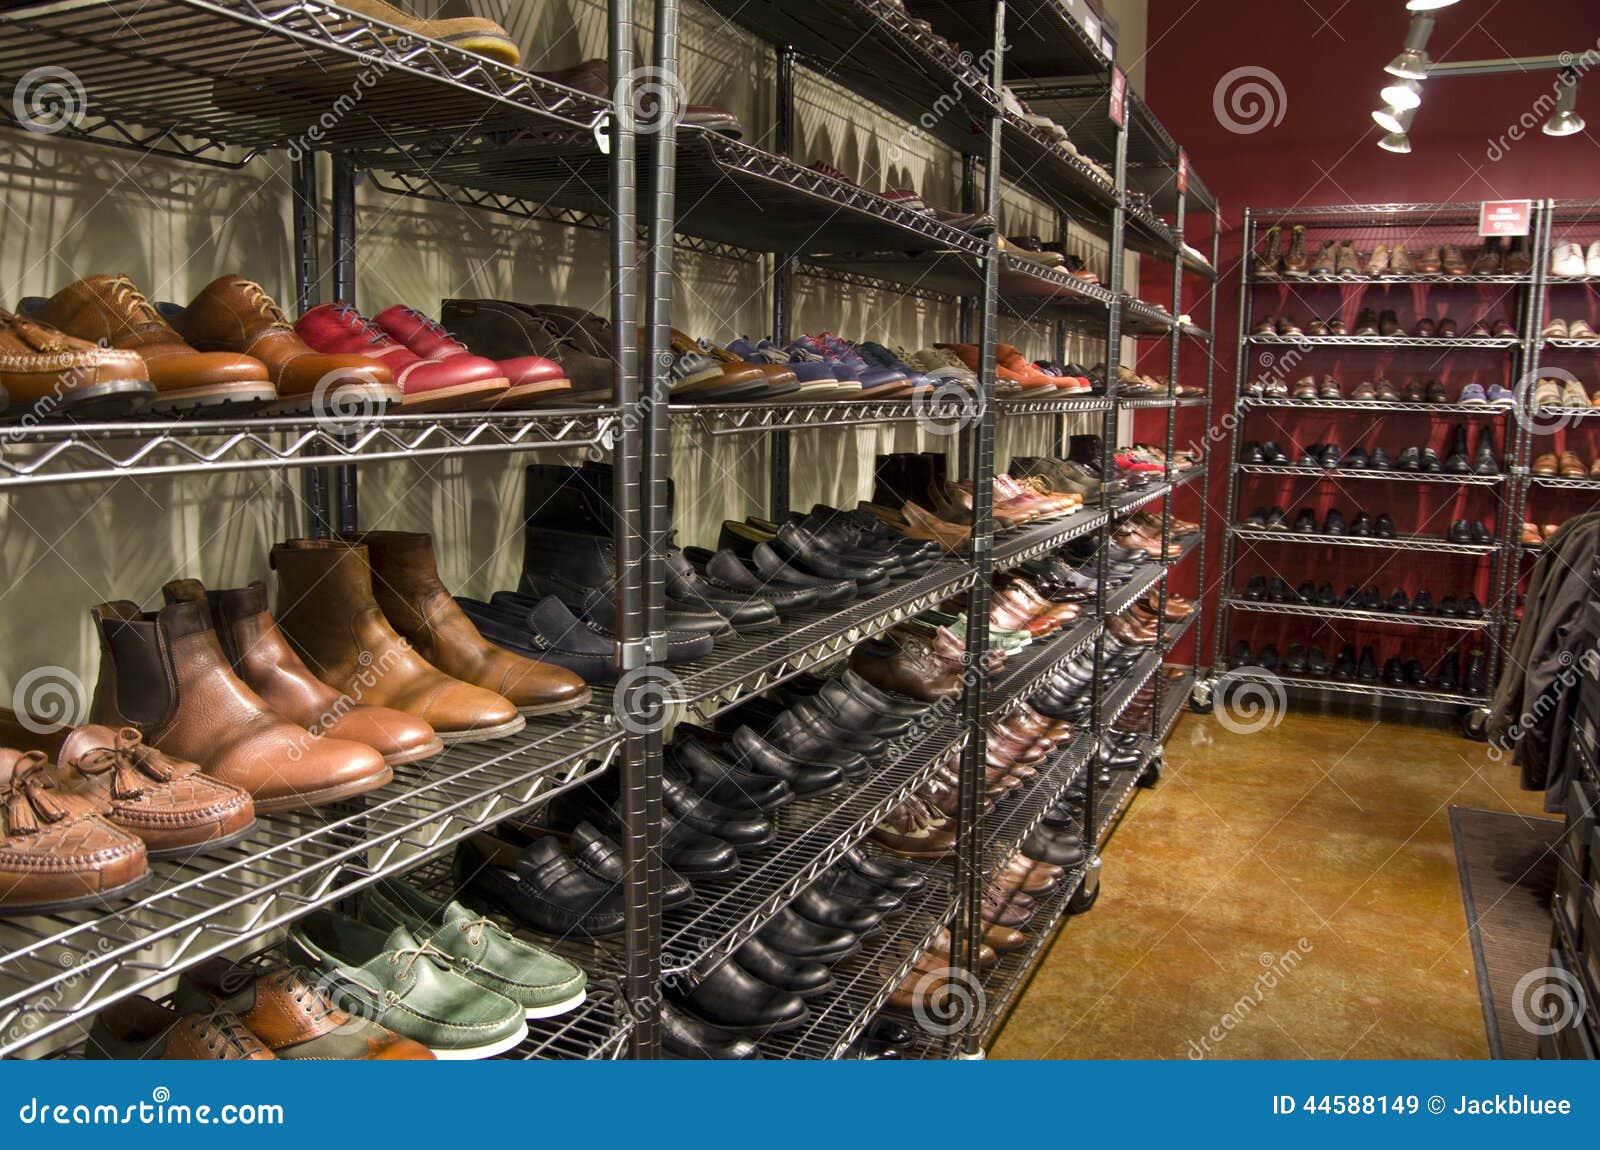 good stores for shoes